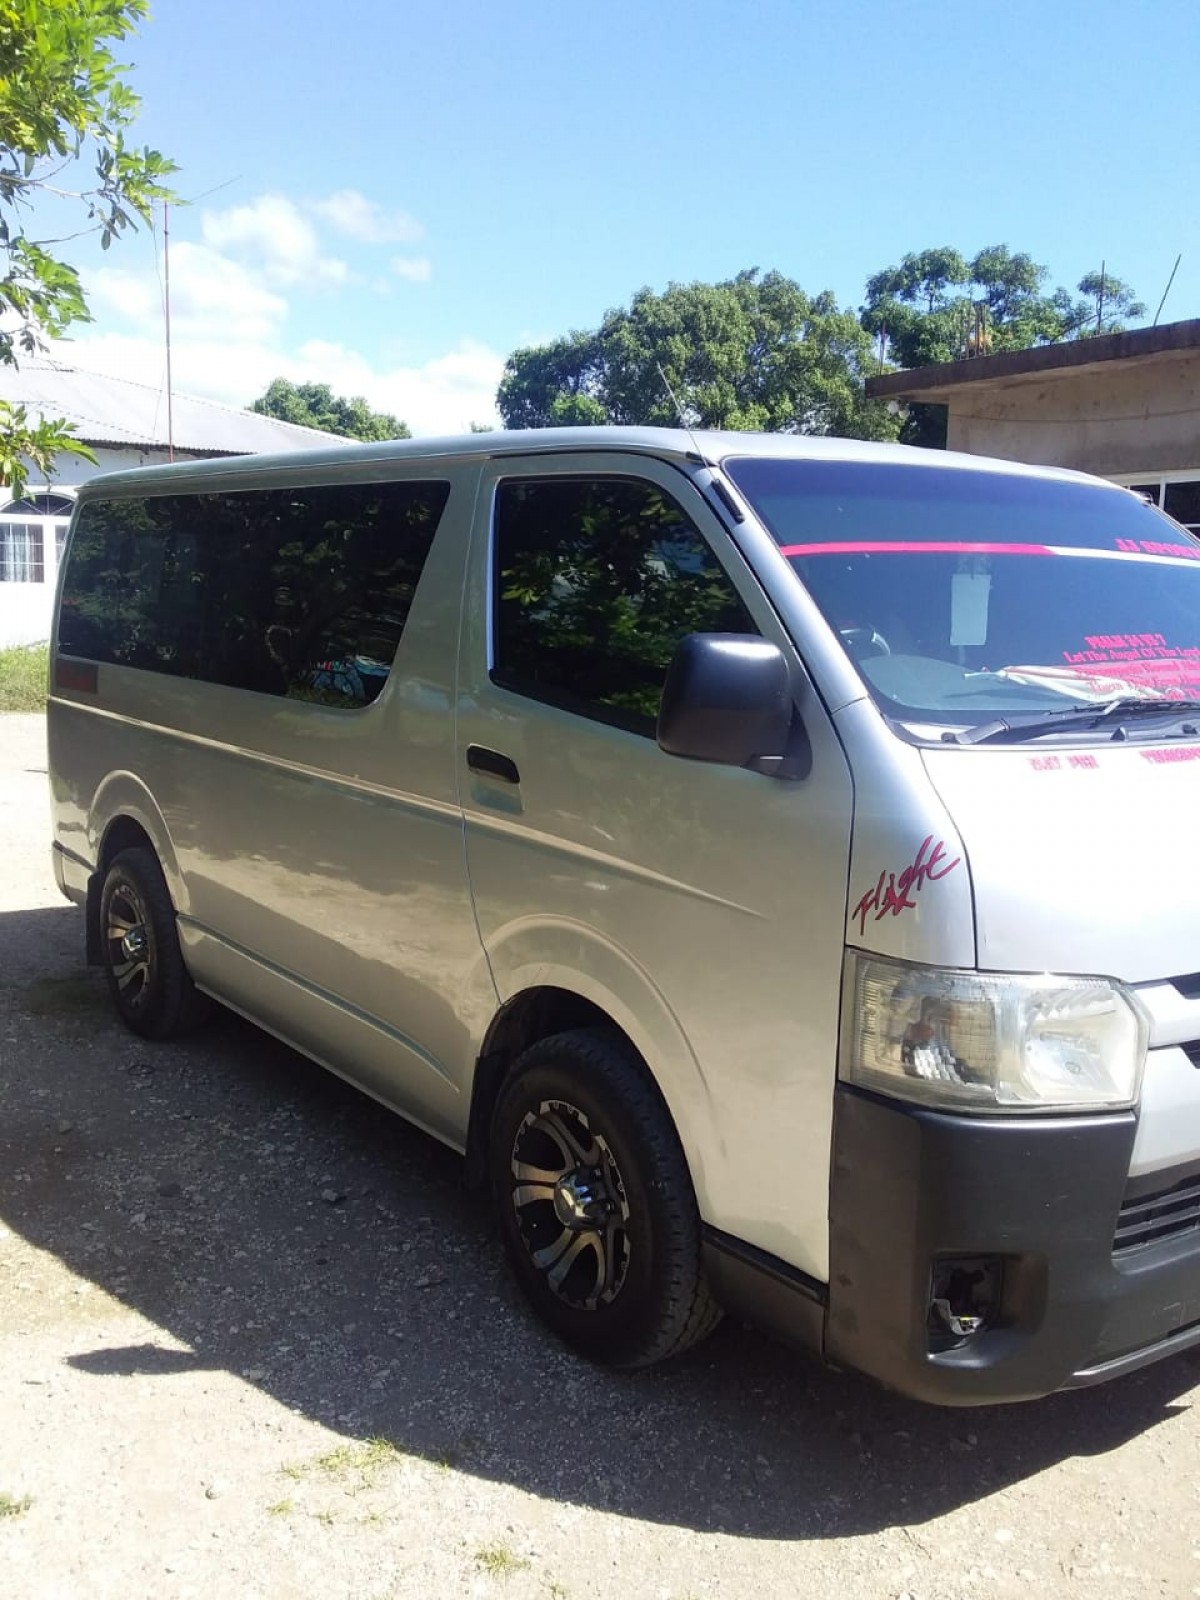 Toyota Jamaica Hiace Bus For Sale 2016 Tiger Maker May Pen Clarendon